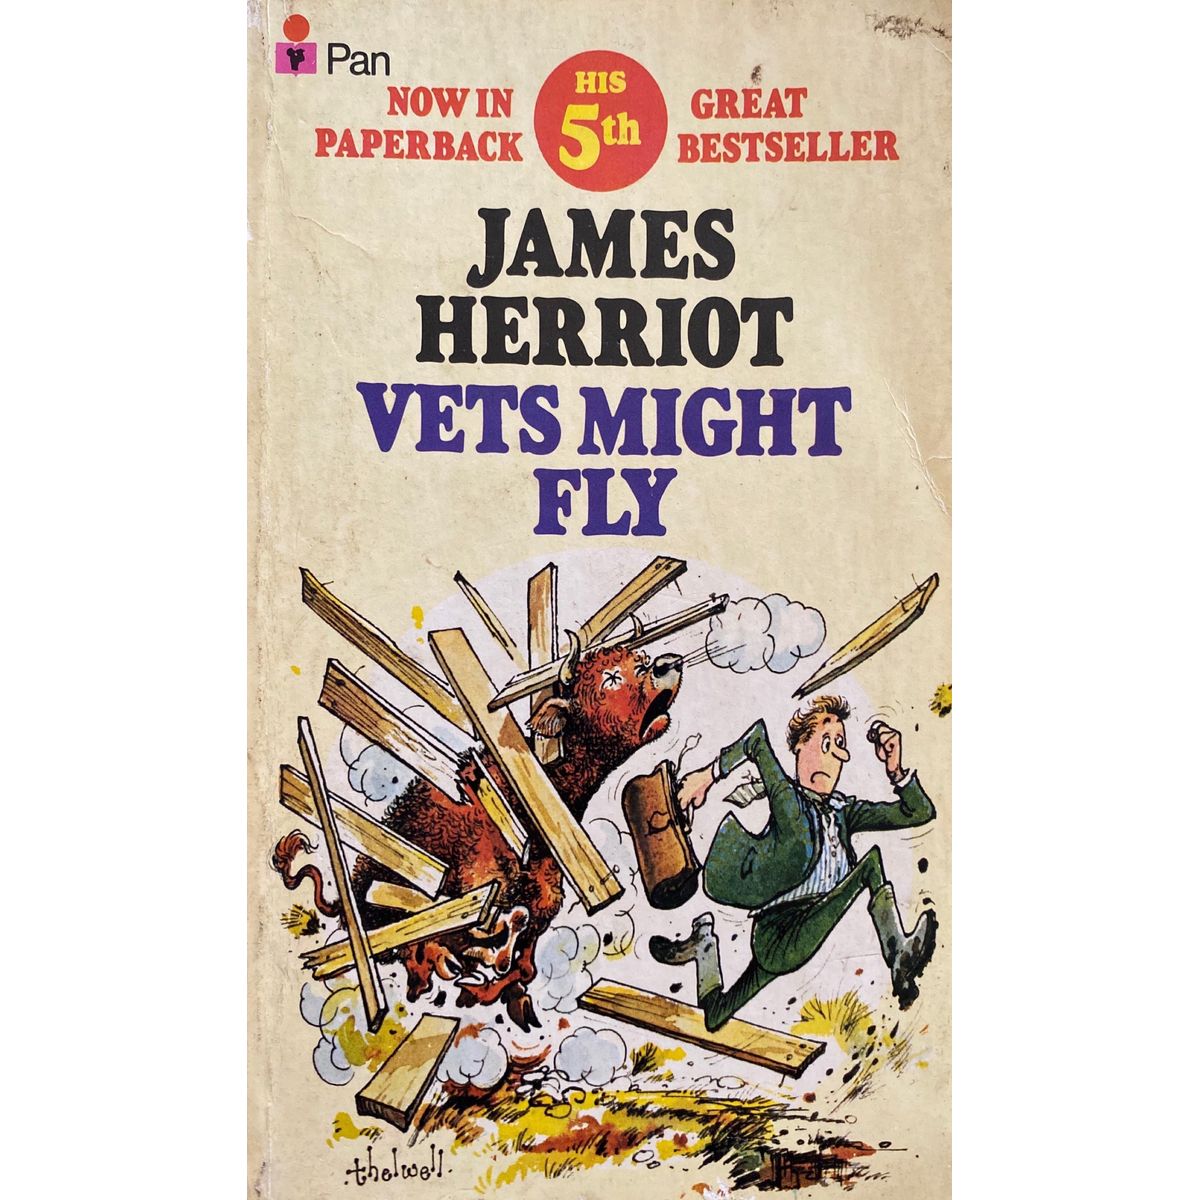 ISBN: 9780330252218 / 0330252216 - Vets Might Fly by James Herriot [1976]